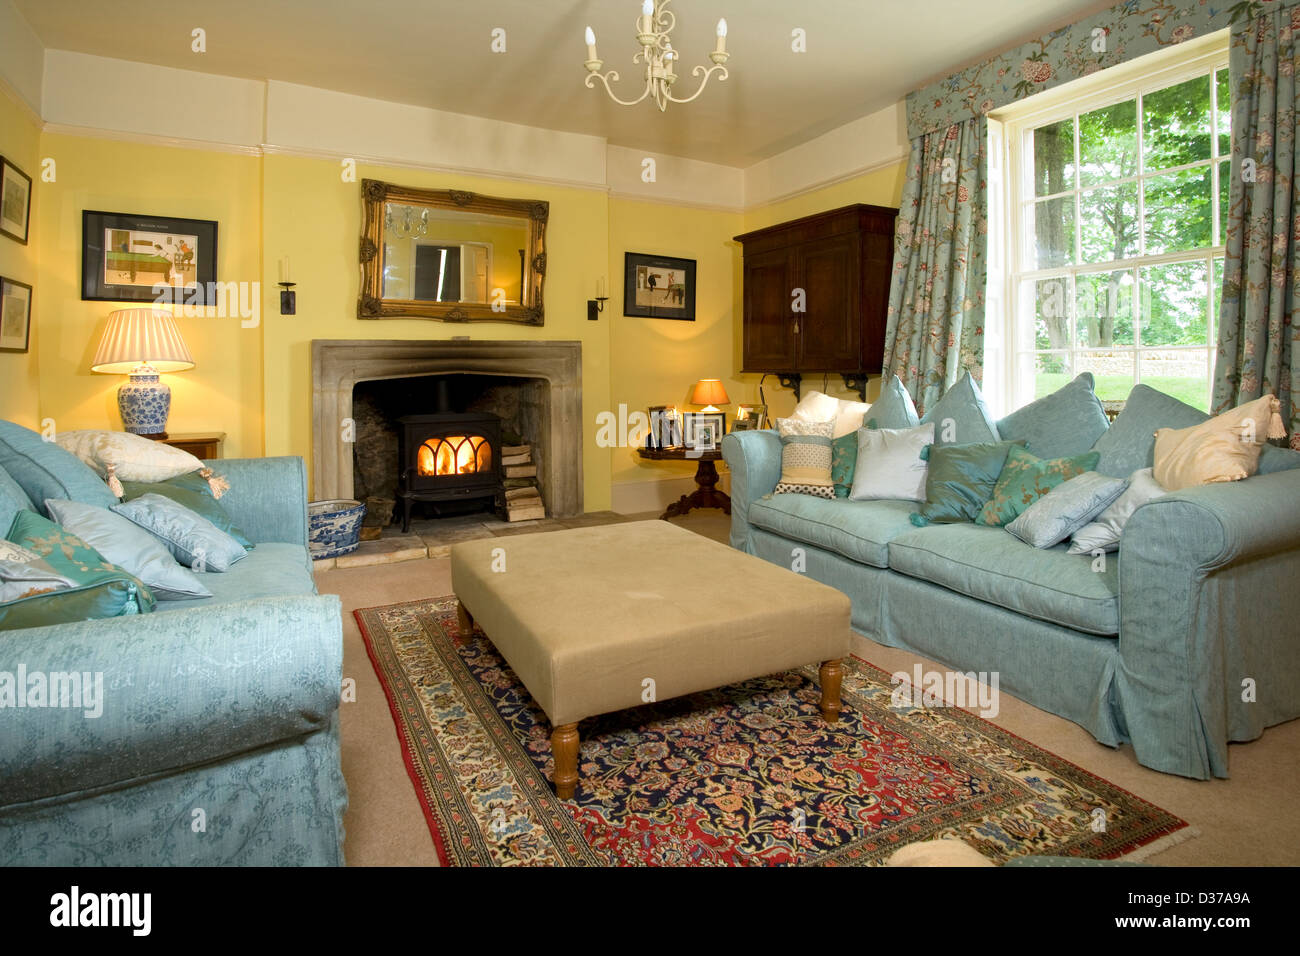 A traditionally furnished sitting room. Stock Photo